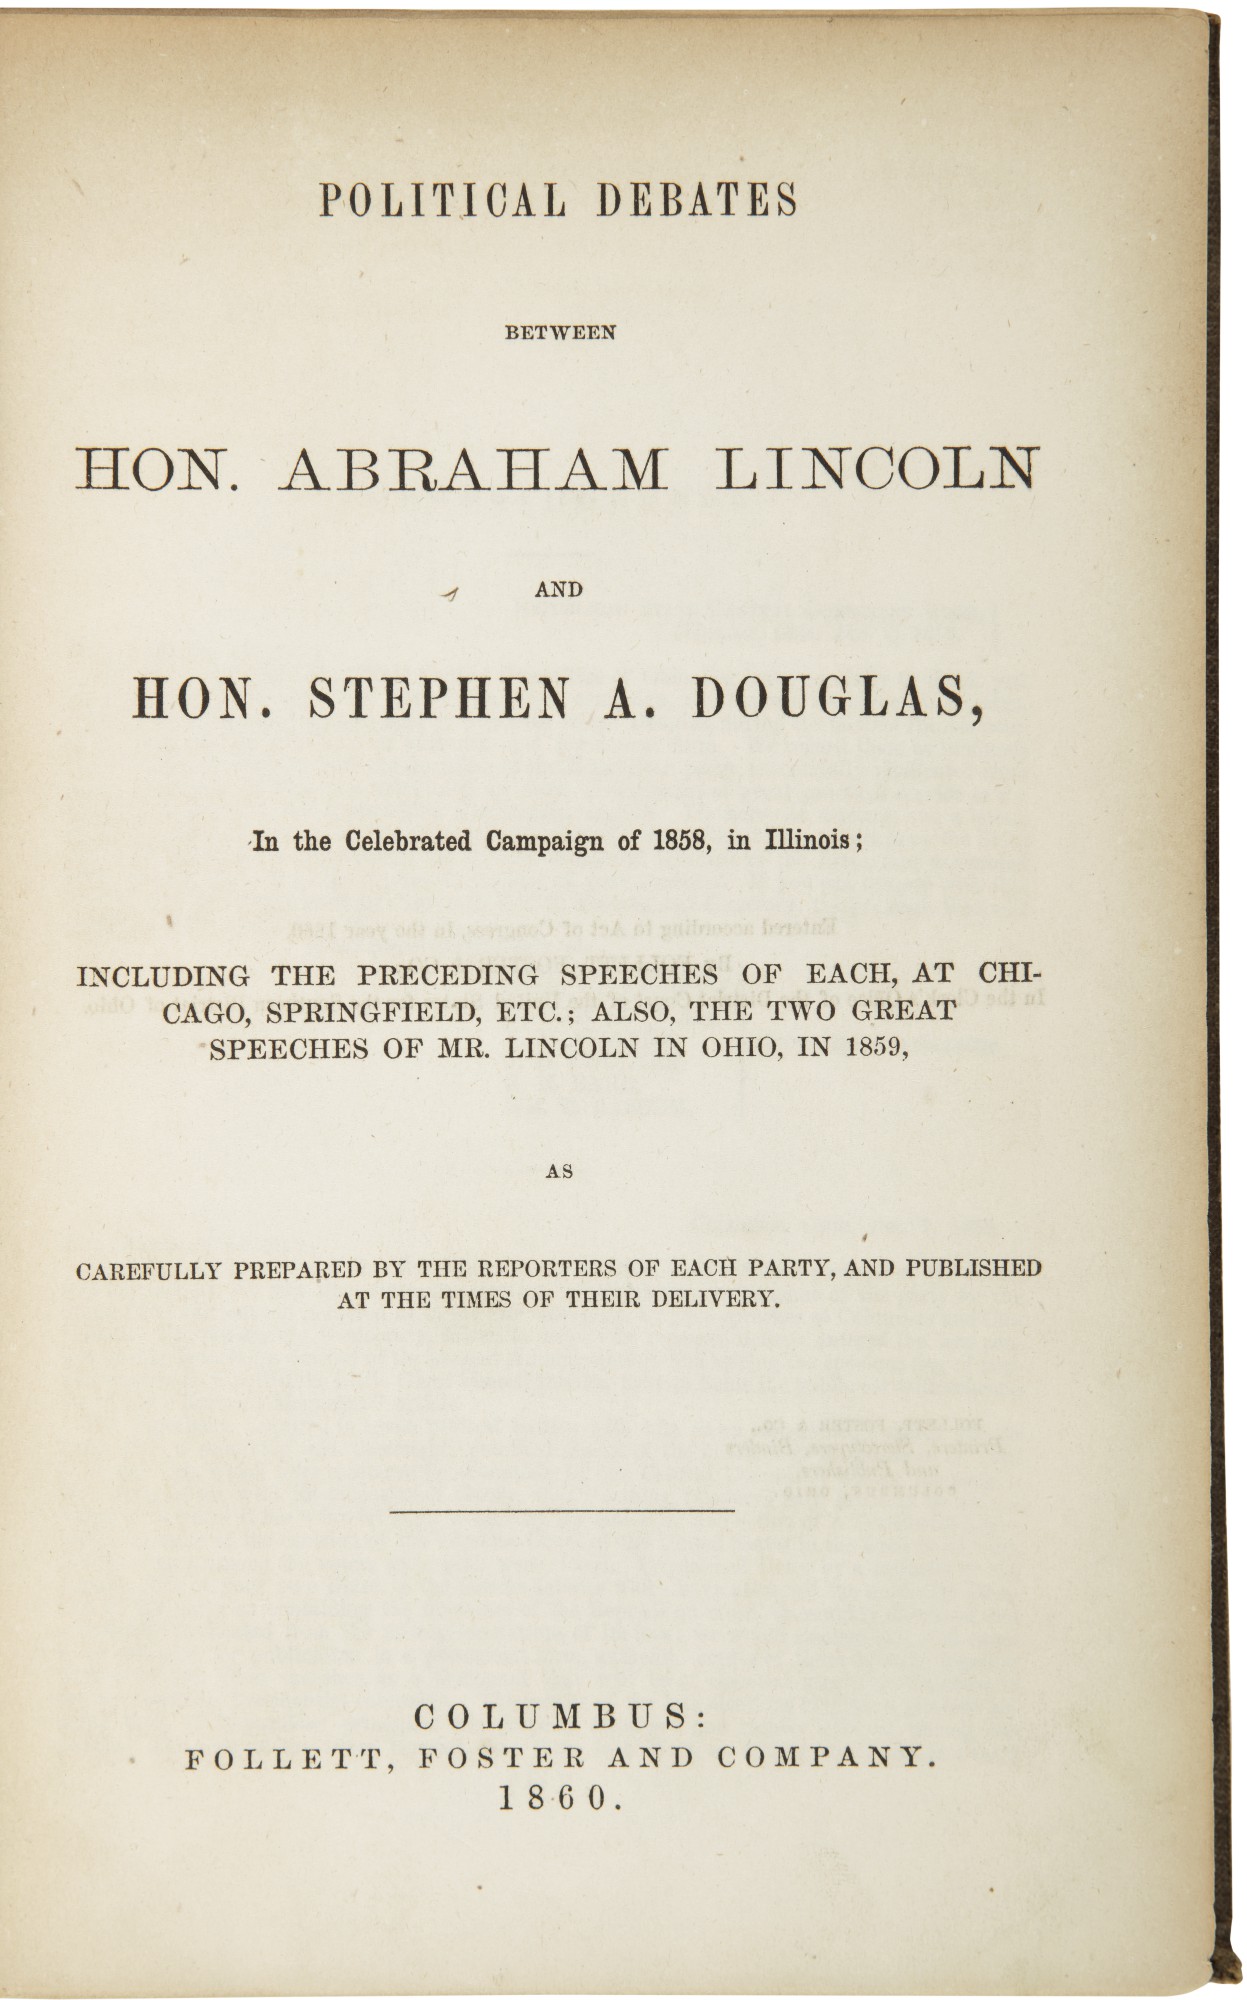 Political debates between Abraham Lincoln and Stephen A. Douglas in the celebrated campaign of 1858 in Illinois